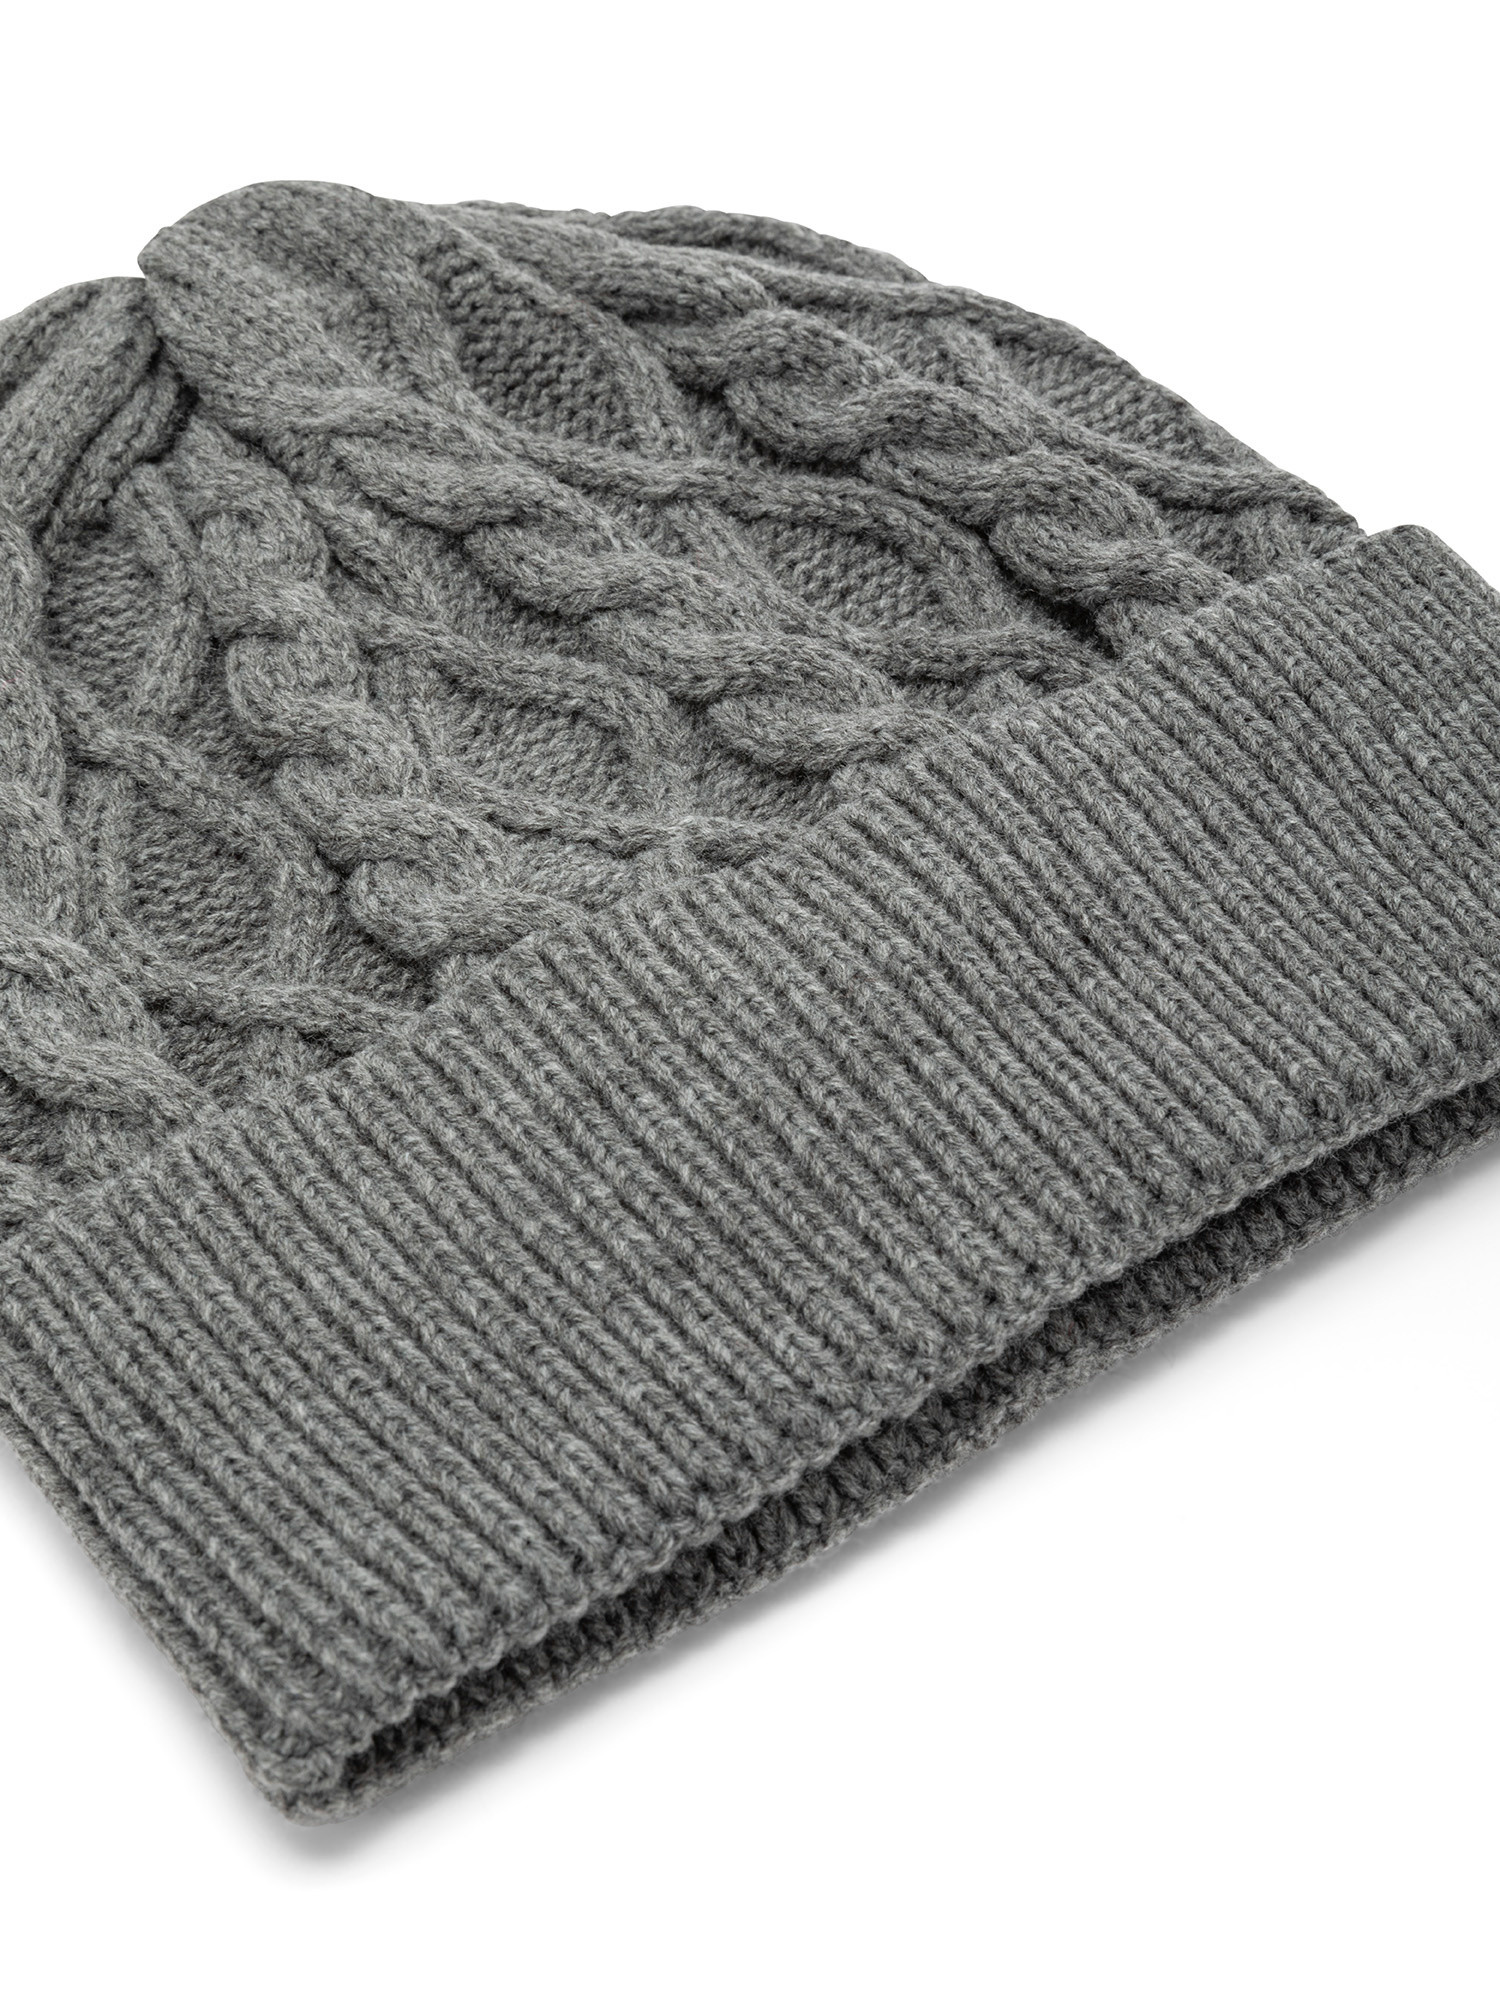 Luca D'Altieri - Beanie with knitted pattern, Grey, large image number 1